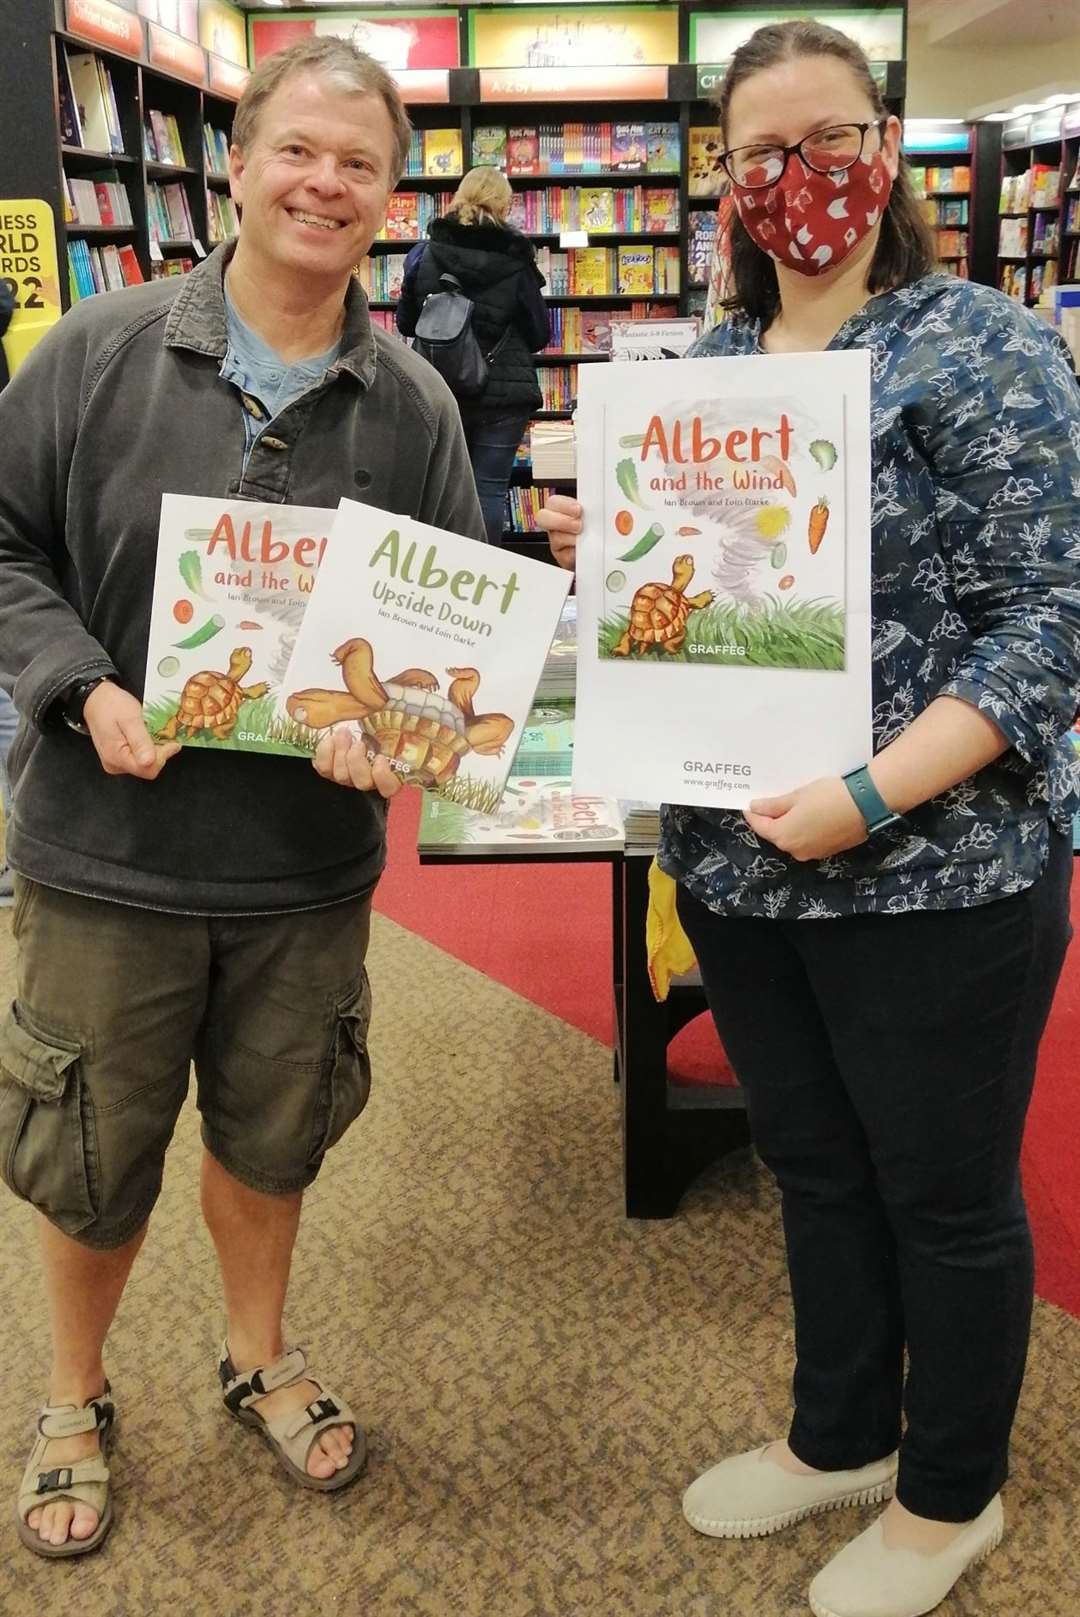 Ian and Waterstone's head of the children's department Mihaela